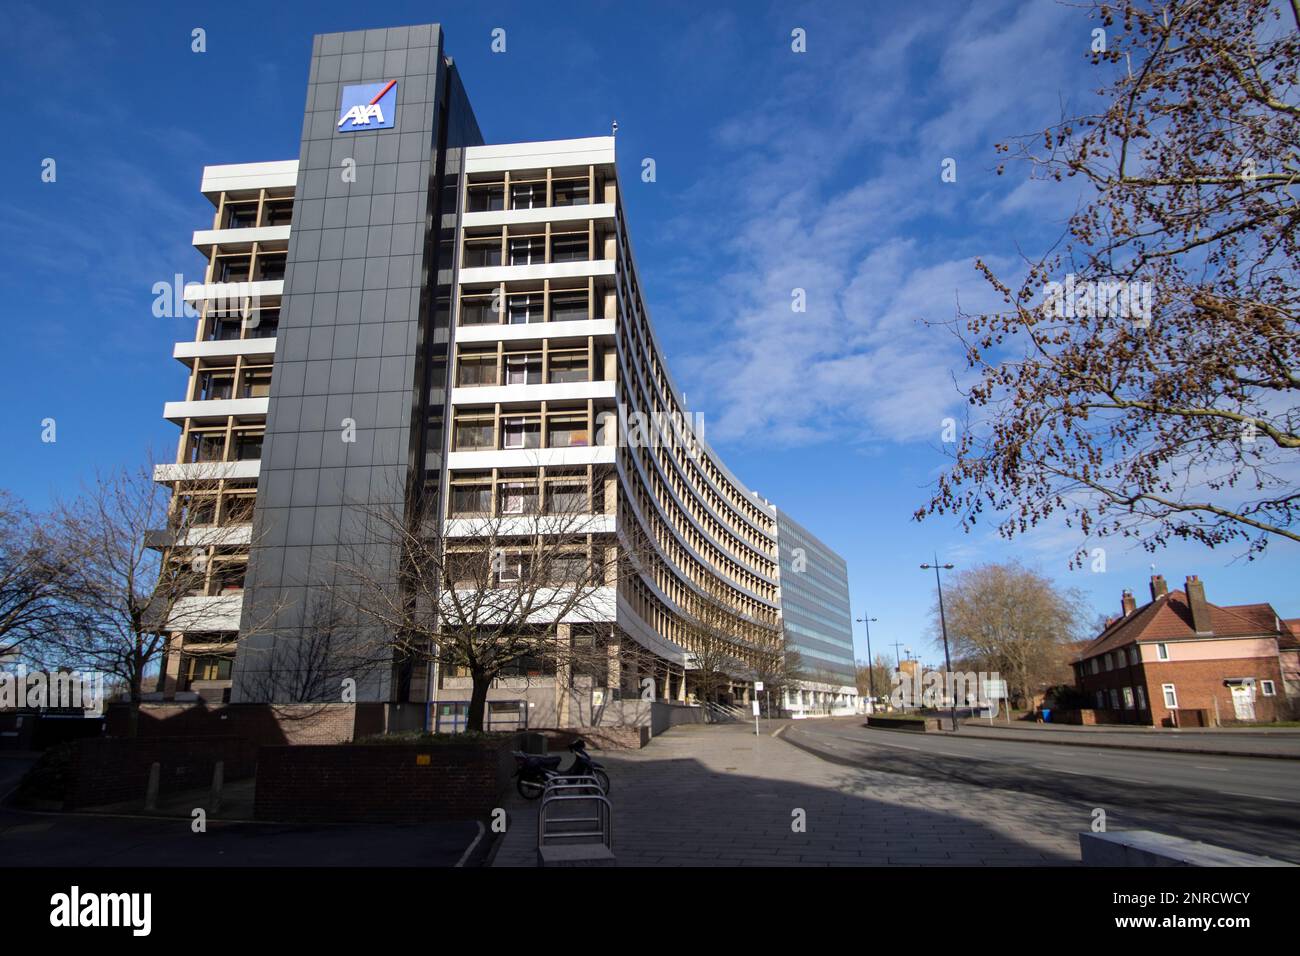 The AXA Insurance offices in the centre of Ipswich, Suffolk, UK Stock Photo